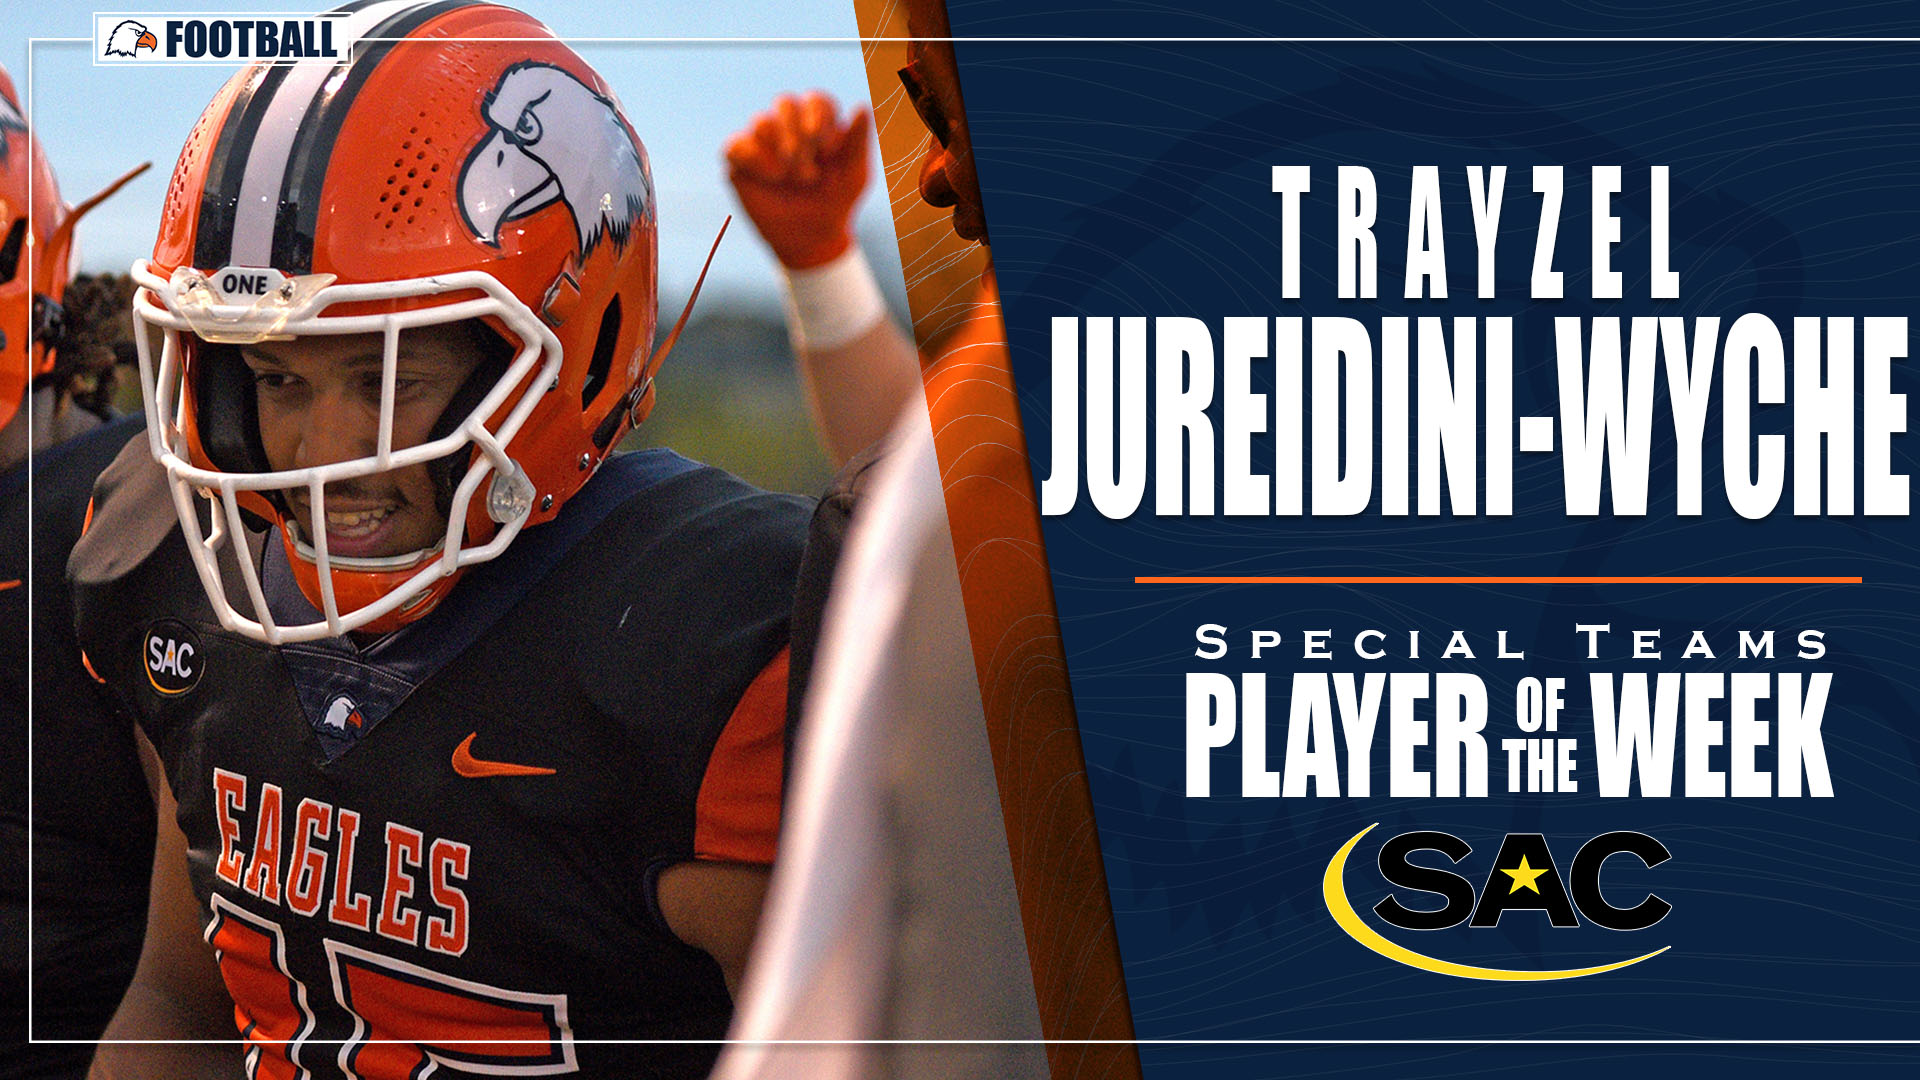 Jureidini-Wyche nets special teams player of the week honors from the SAC